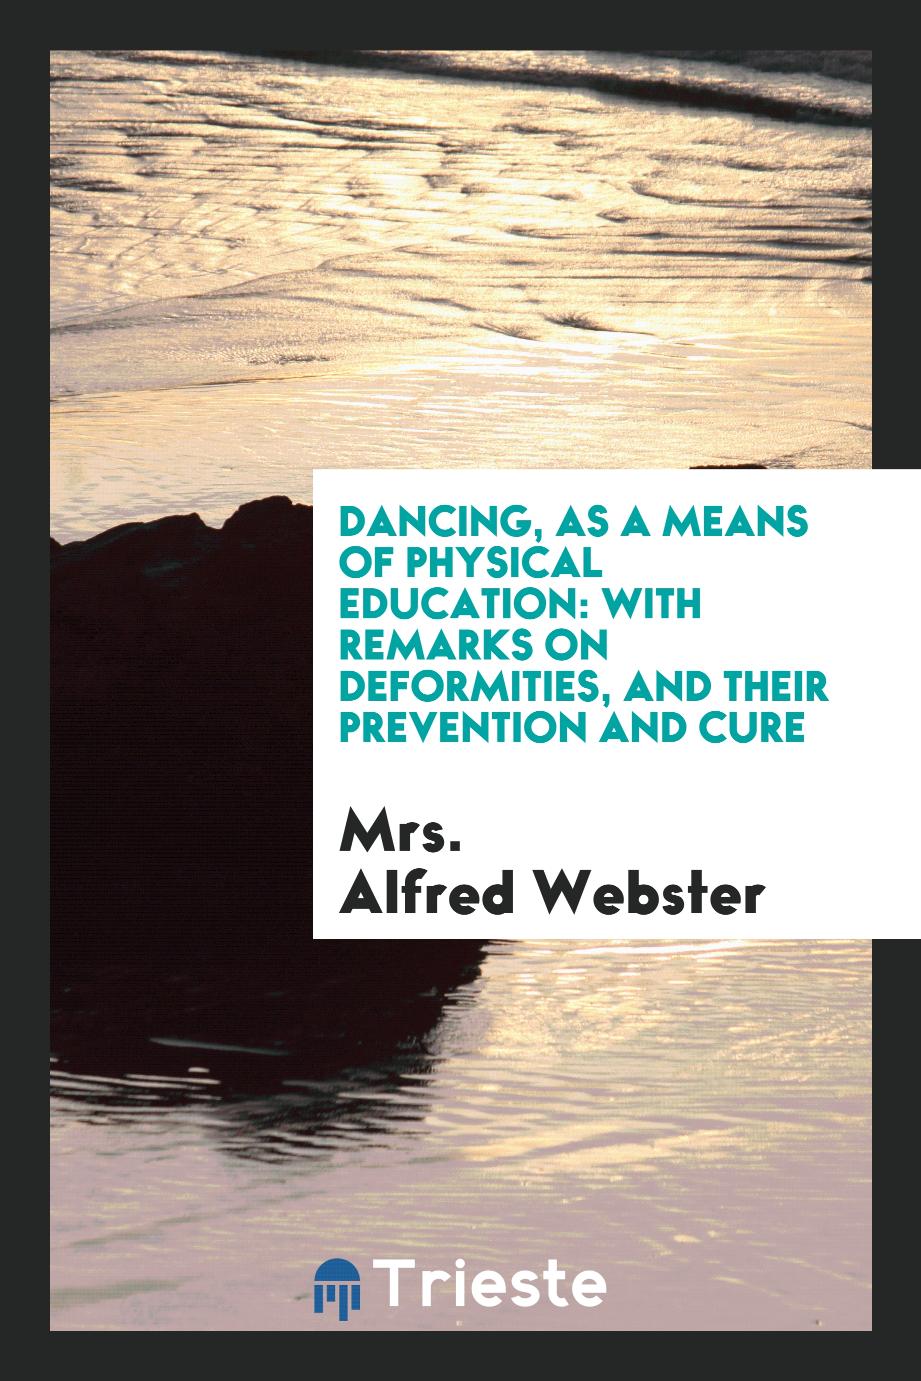 Dancing, as a means of physical education: with remarks on deformities, and their prevention and cure